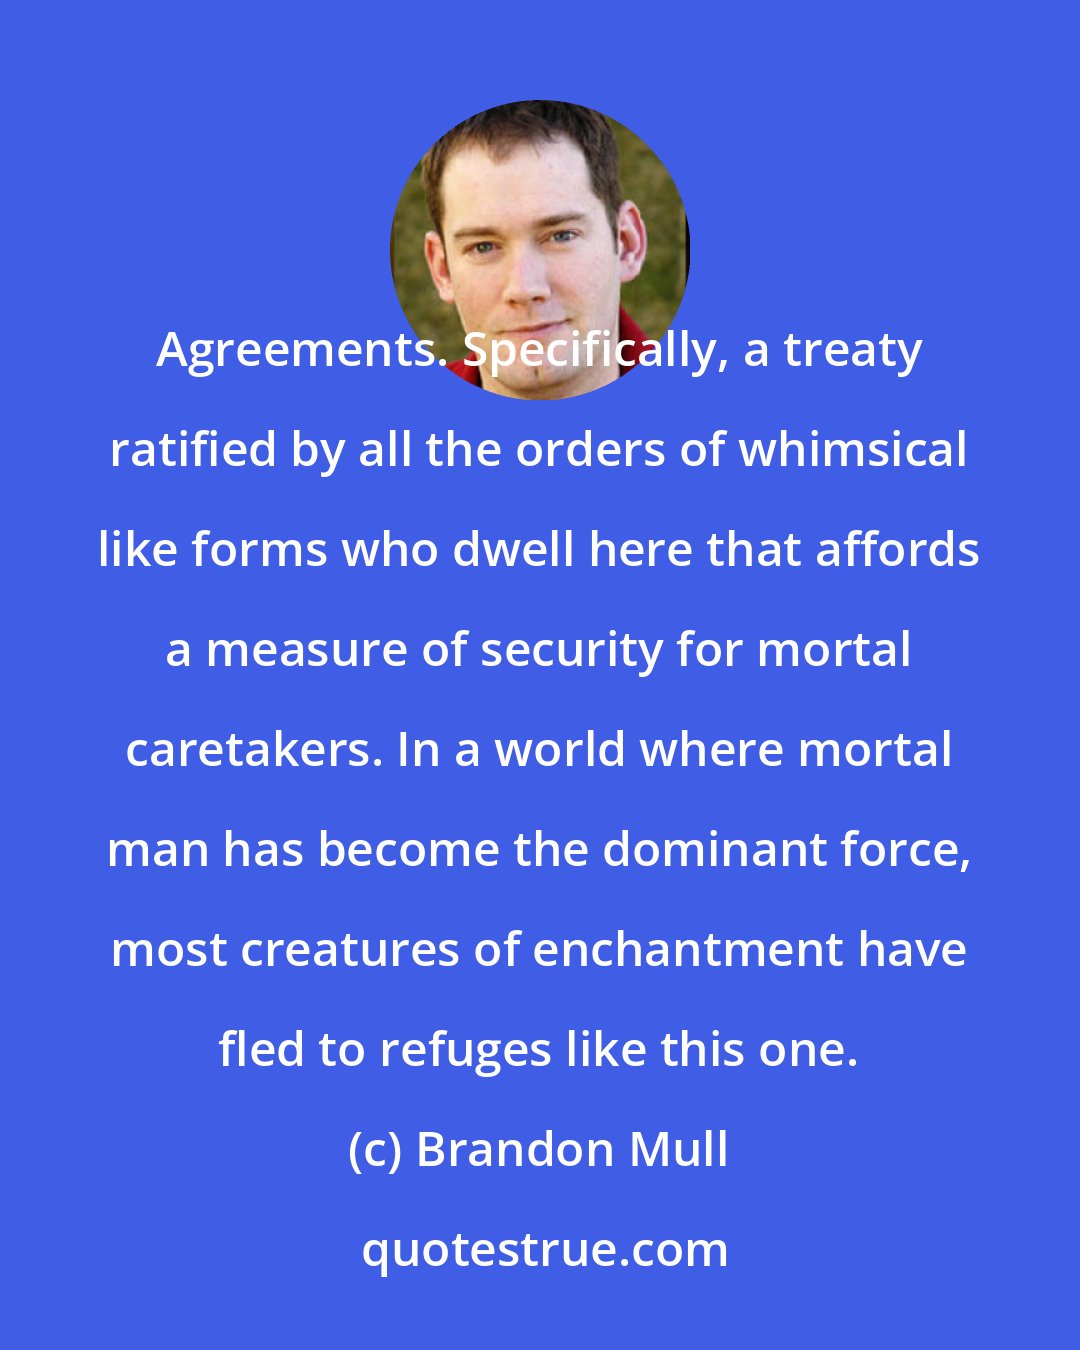 Brandon Mull: Agreements. Specifically, a treaty ratified by all the orders of whimsical like forms who dwell here that affords a measure of security for mortal caretakers. In a world where mortal man has become the dominant force, most creatures of enchantment have fled to refuges like this one.